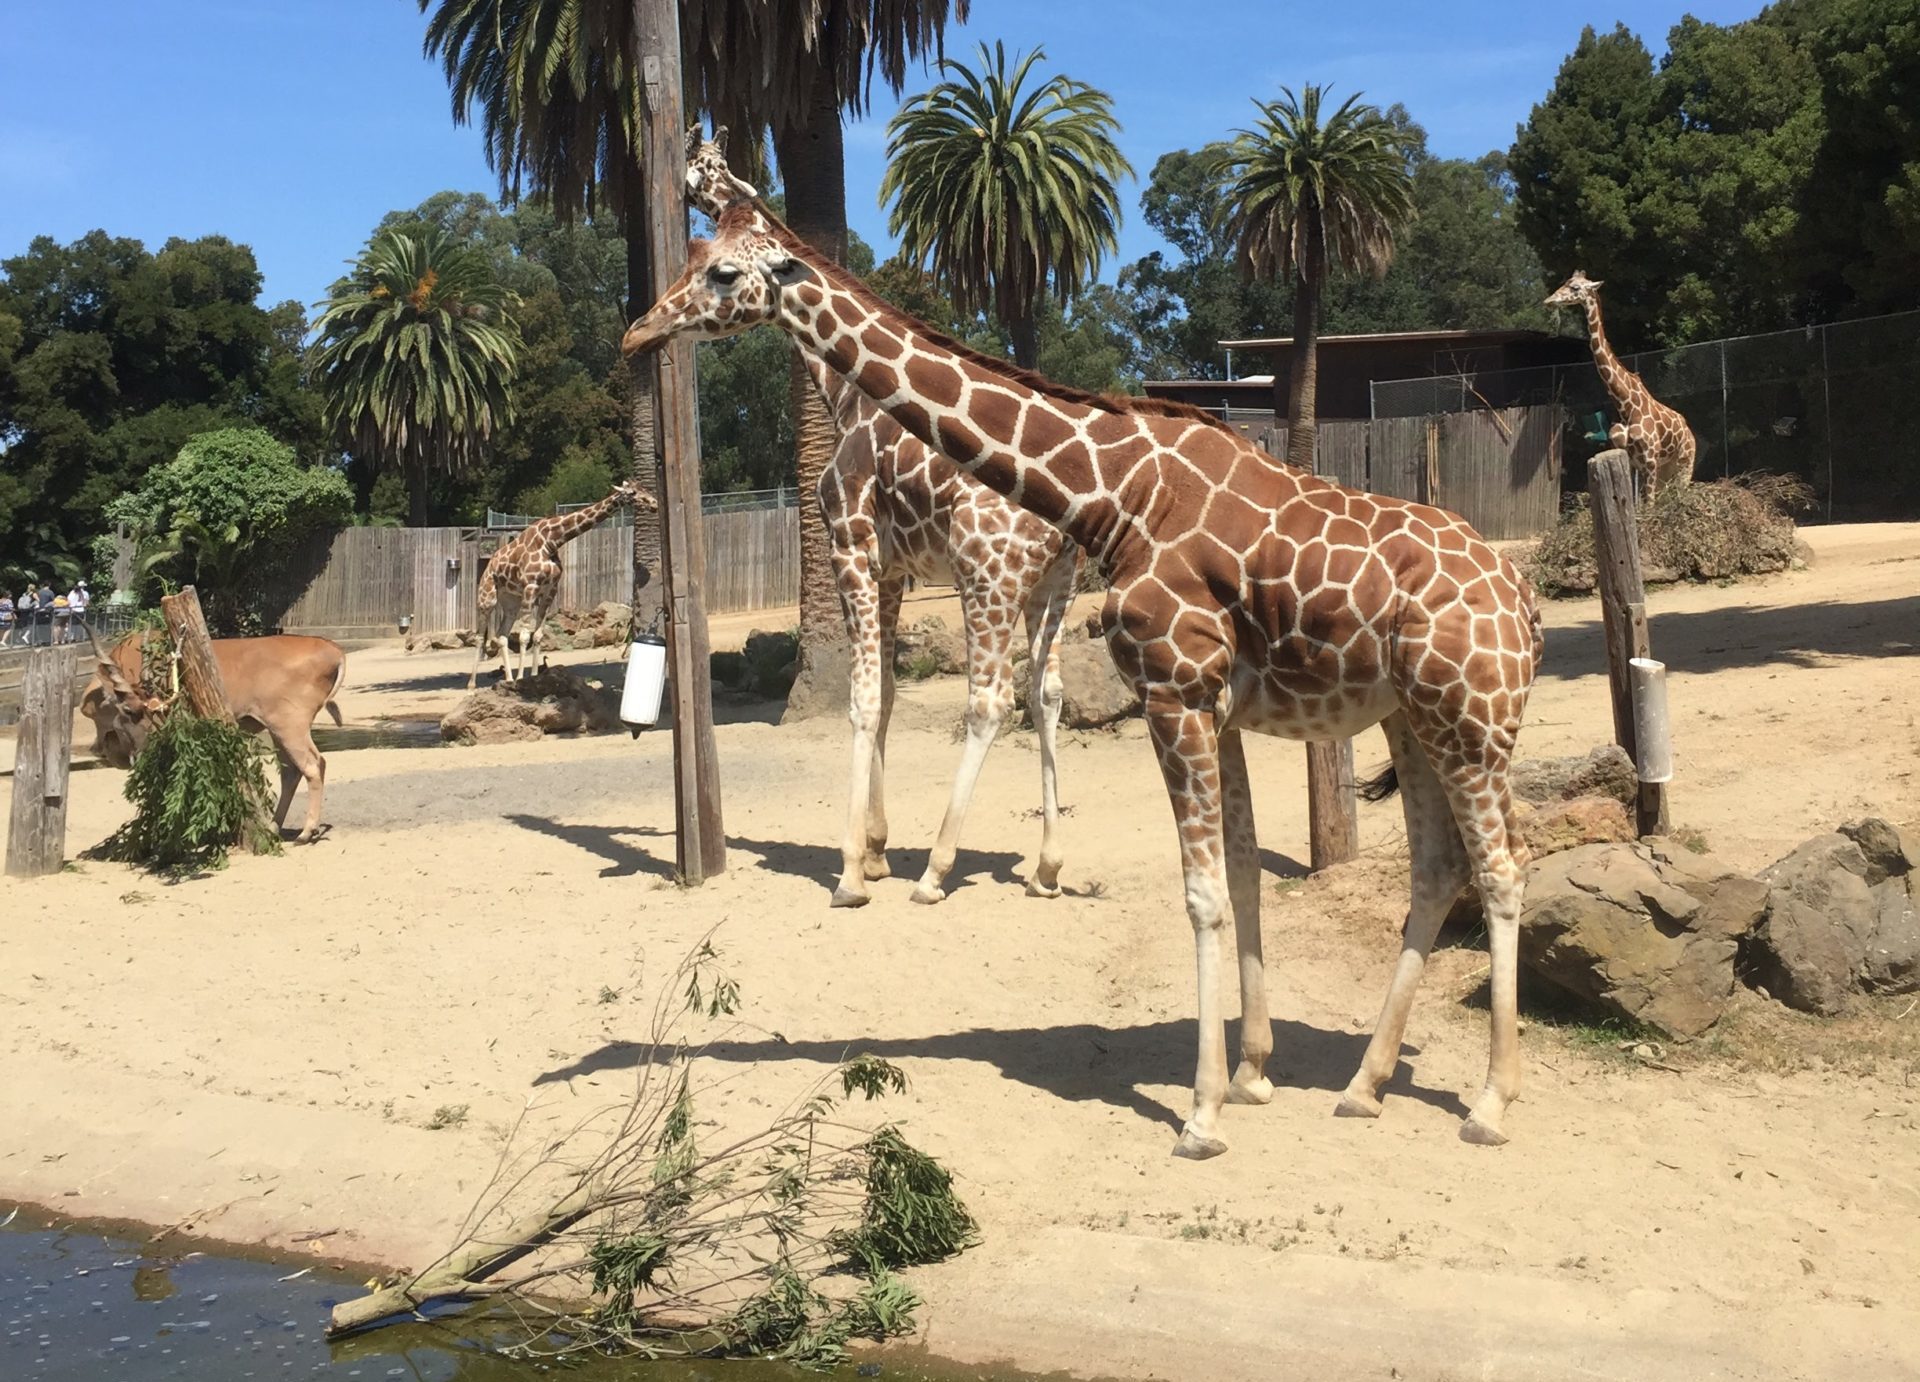 Oakland Zoo - The Oakland Athletics are here for their